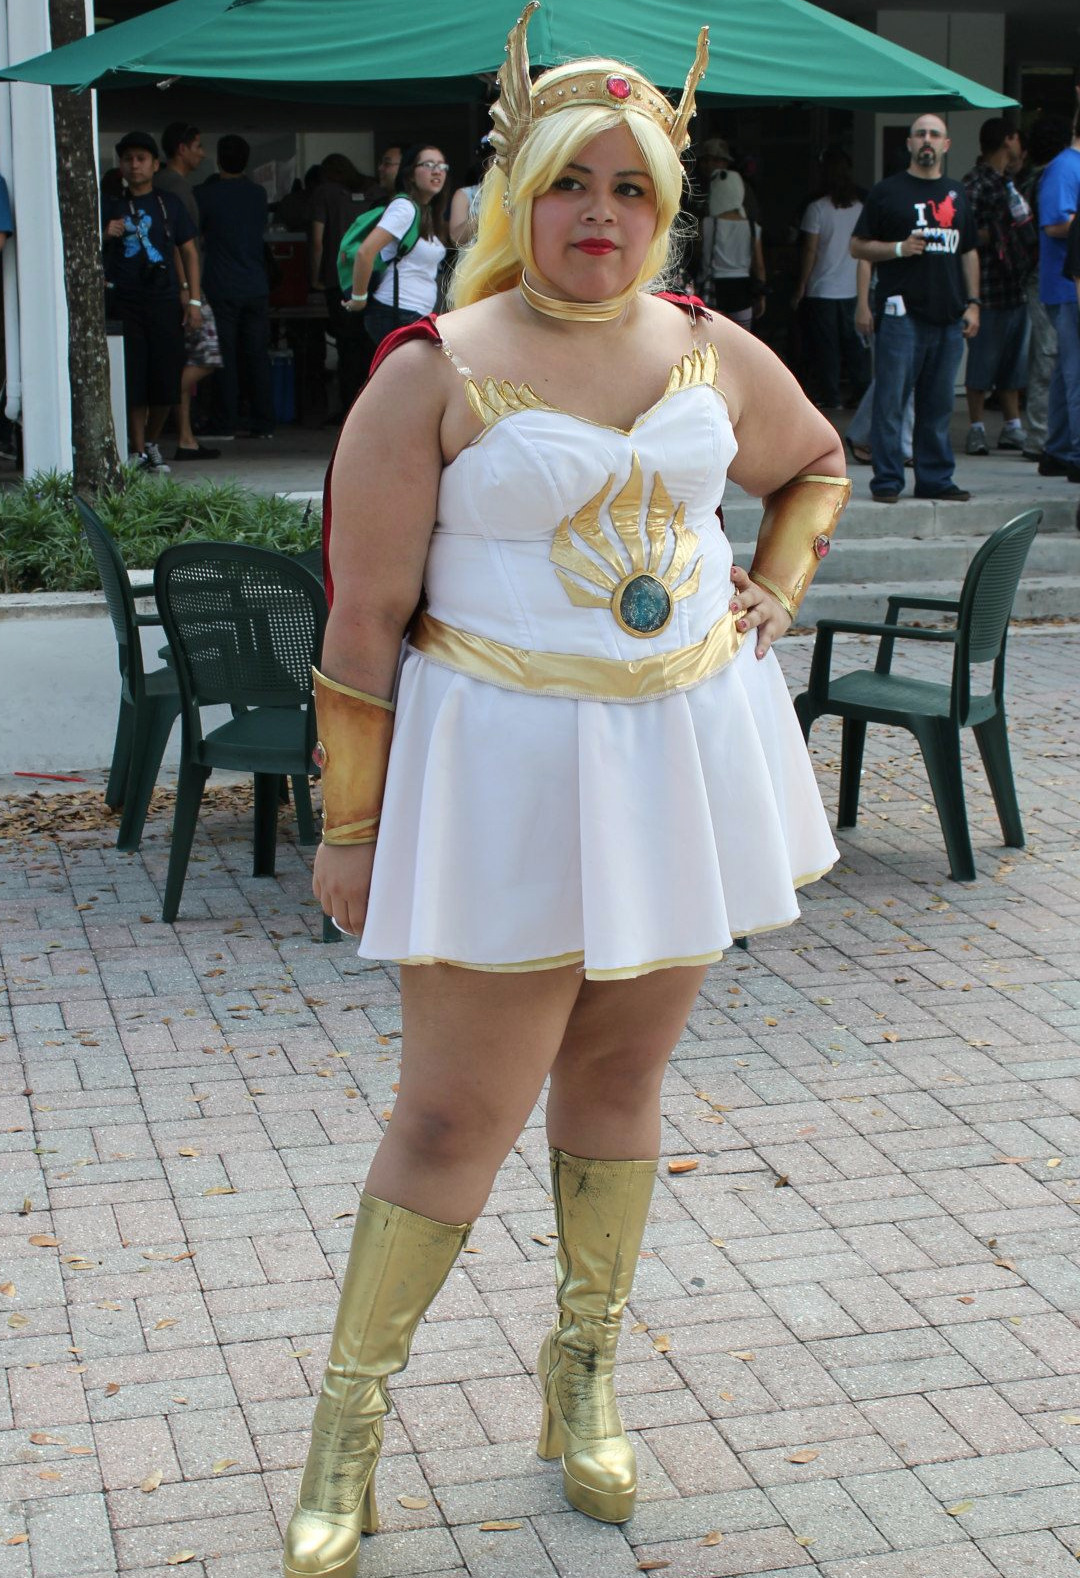 This is my She-Ra cosplay that I finished constructing a few days ago. 
I take my cosplaying very seriously. I put a lot of heart and work into making all my things from scratch, into the details, and into having a very well constructed outfit. But nothing really grinds my gears as much as not being taken seriously as a cosplayer due to my size 20 hips. Like, wow, the size of my waist does not detract how flippin&#8217; stellar the paint job on my armor is.
My point is, make the best costume you possibly can. Everyone else can shut their mouths as they gawk at your bodacious cosplaying self.